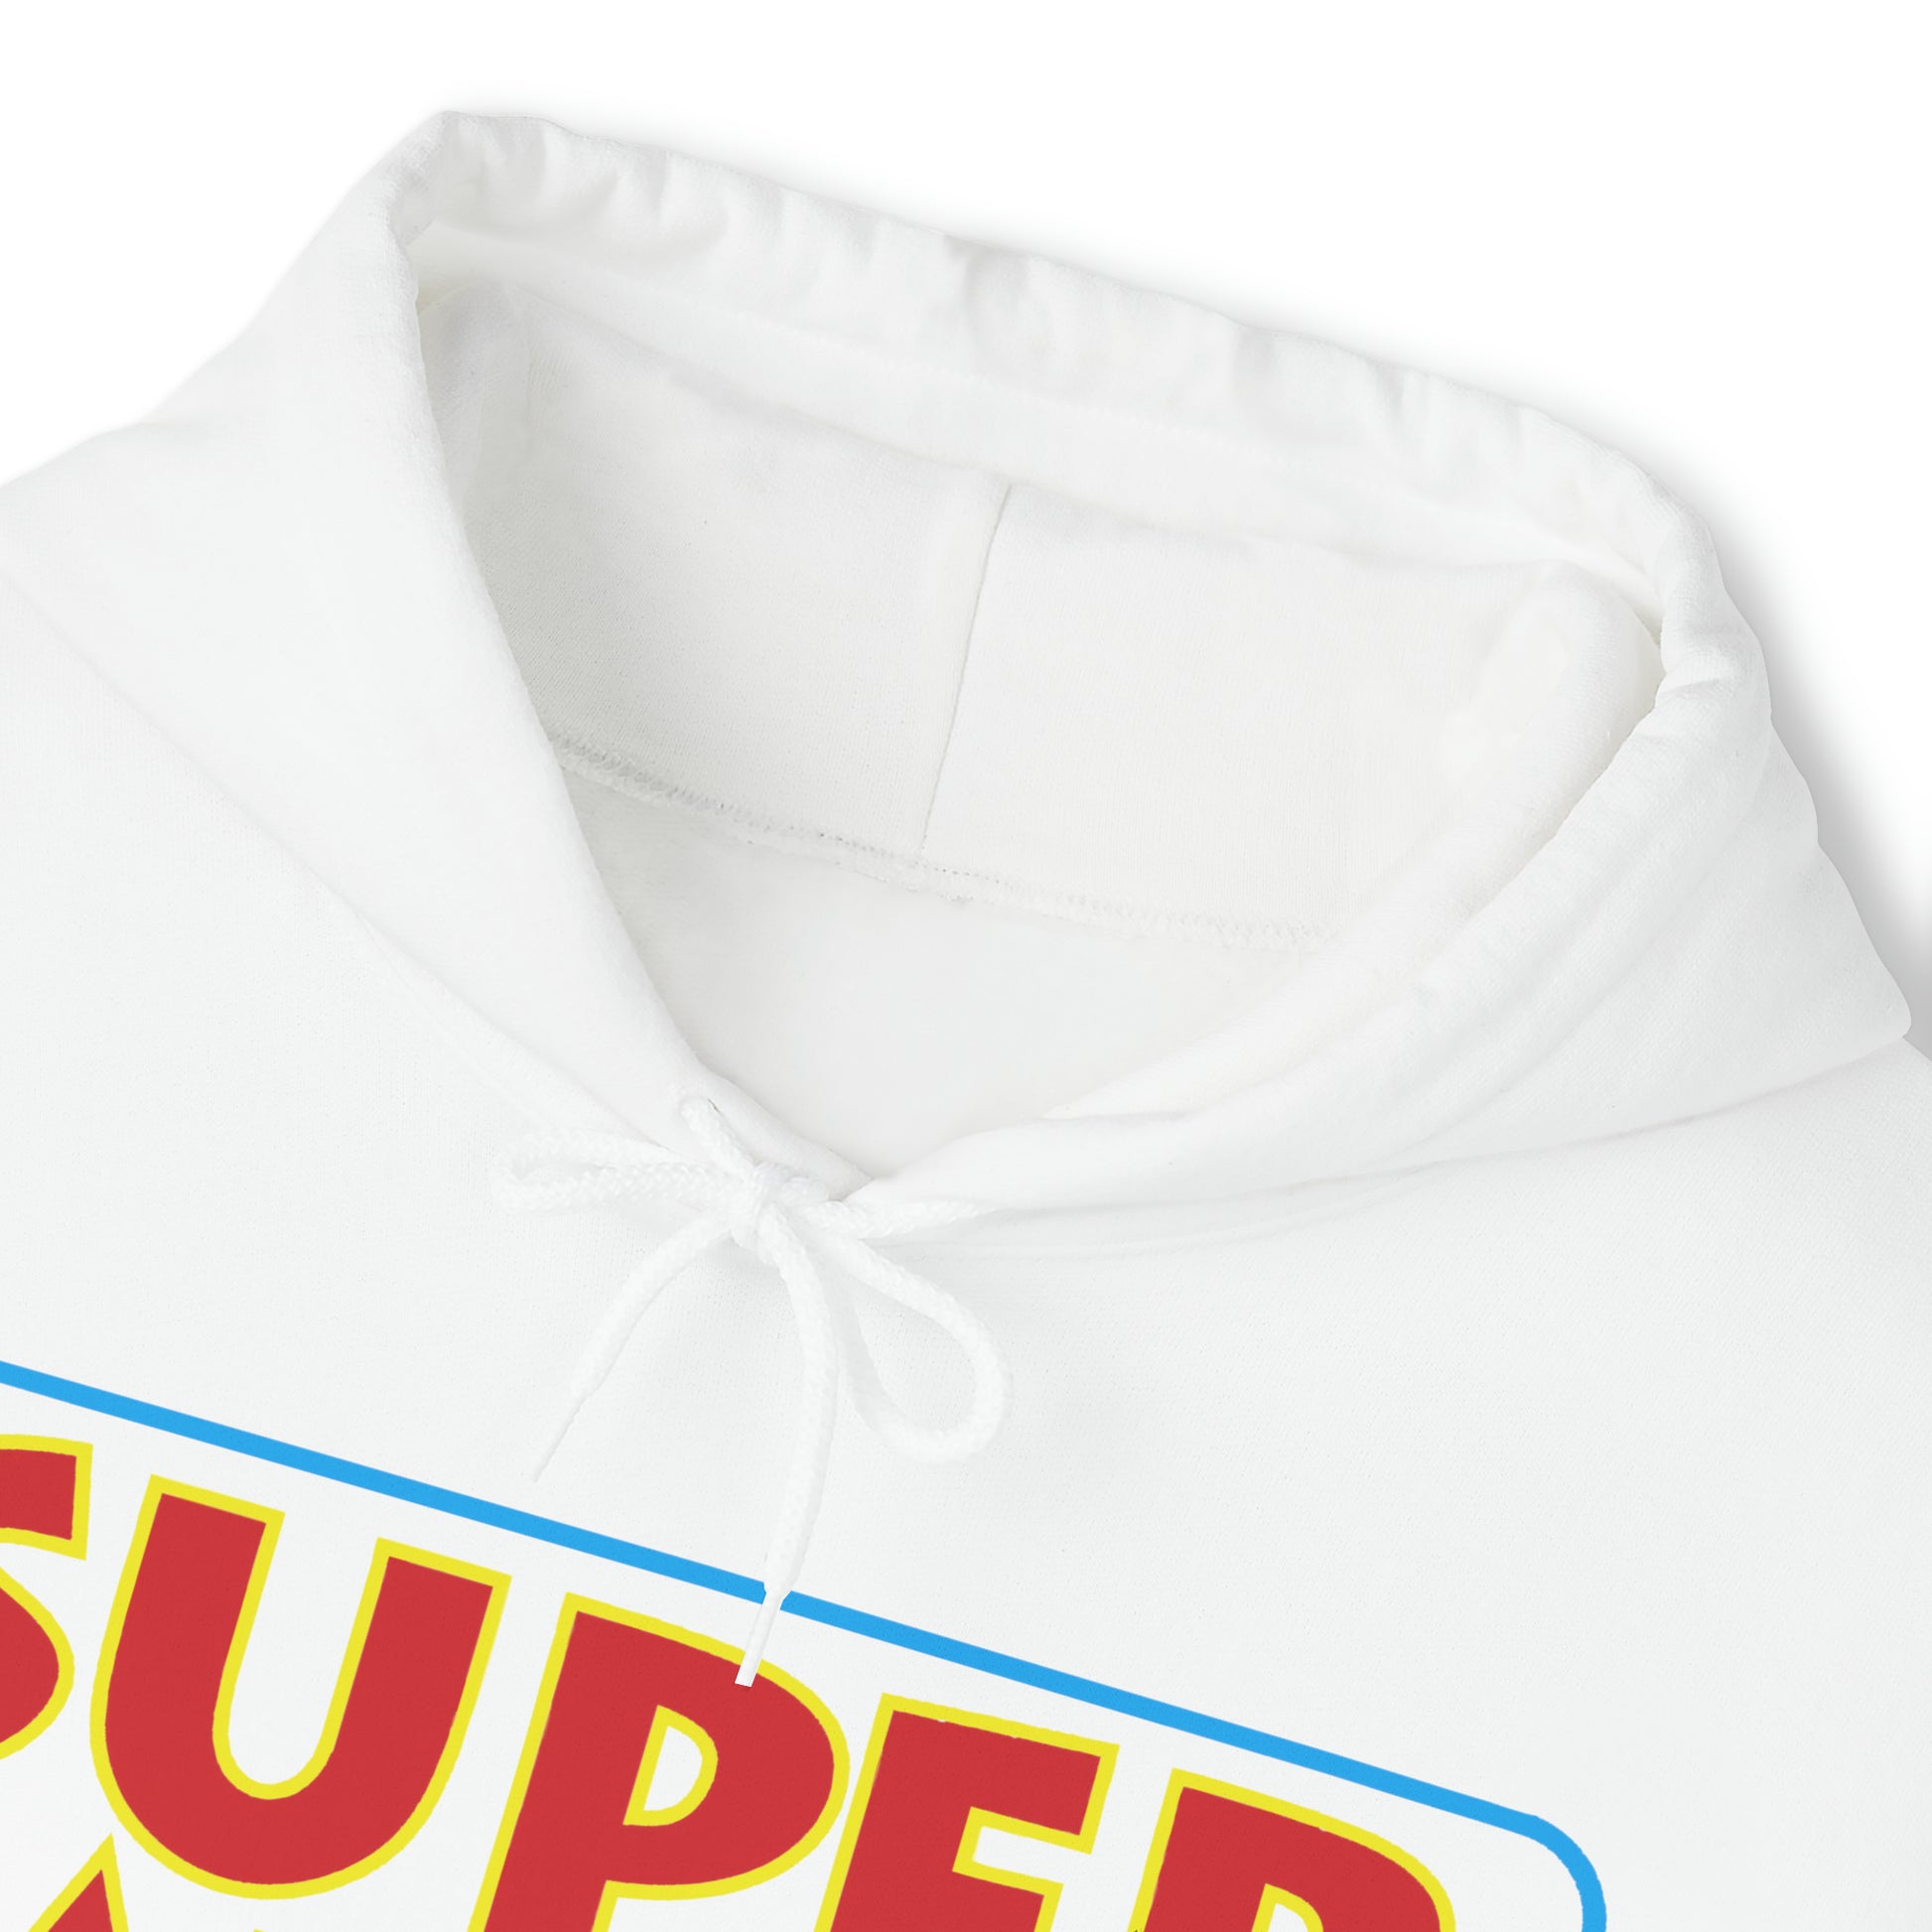 Close-up of a white Unisex Heavy Blend™ Hooded Sweatshirt by Printify with a colorful "SUPER" text graphic on the front, showing detail of the hood and drawstrings, inspired by Toronto's Cabbagetown.